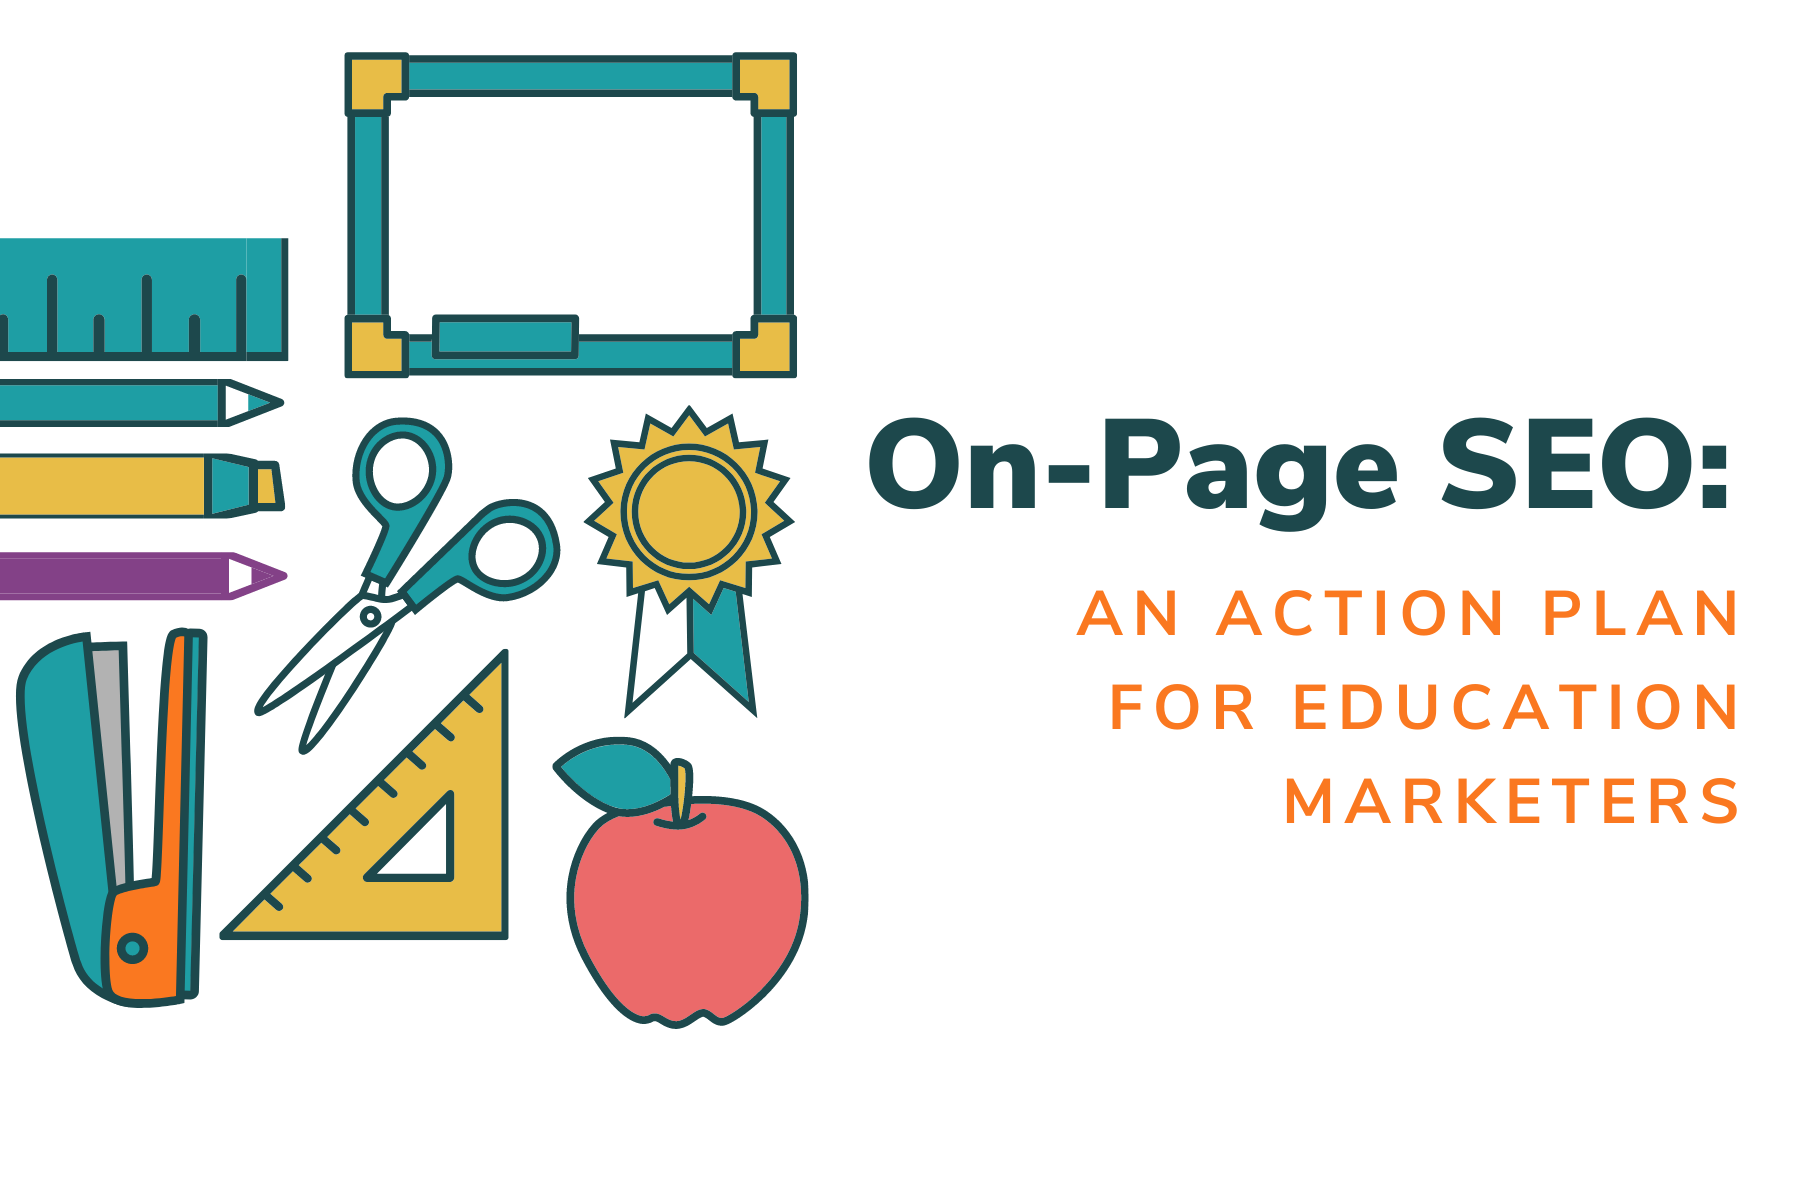 On-Page SEO: An action plan for Education Marketers